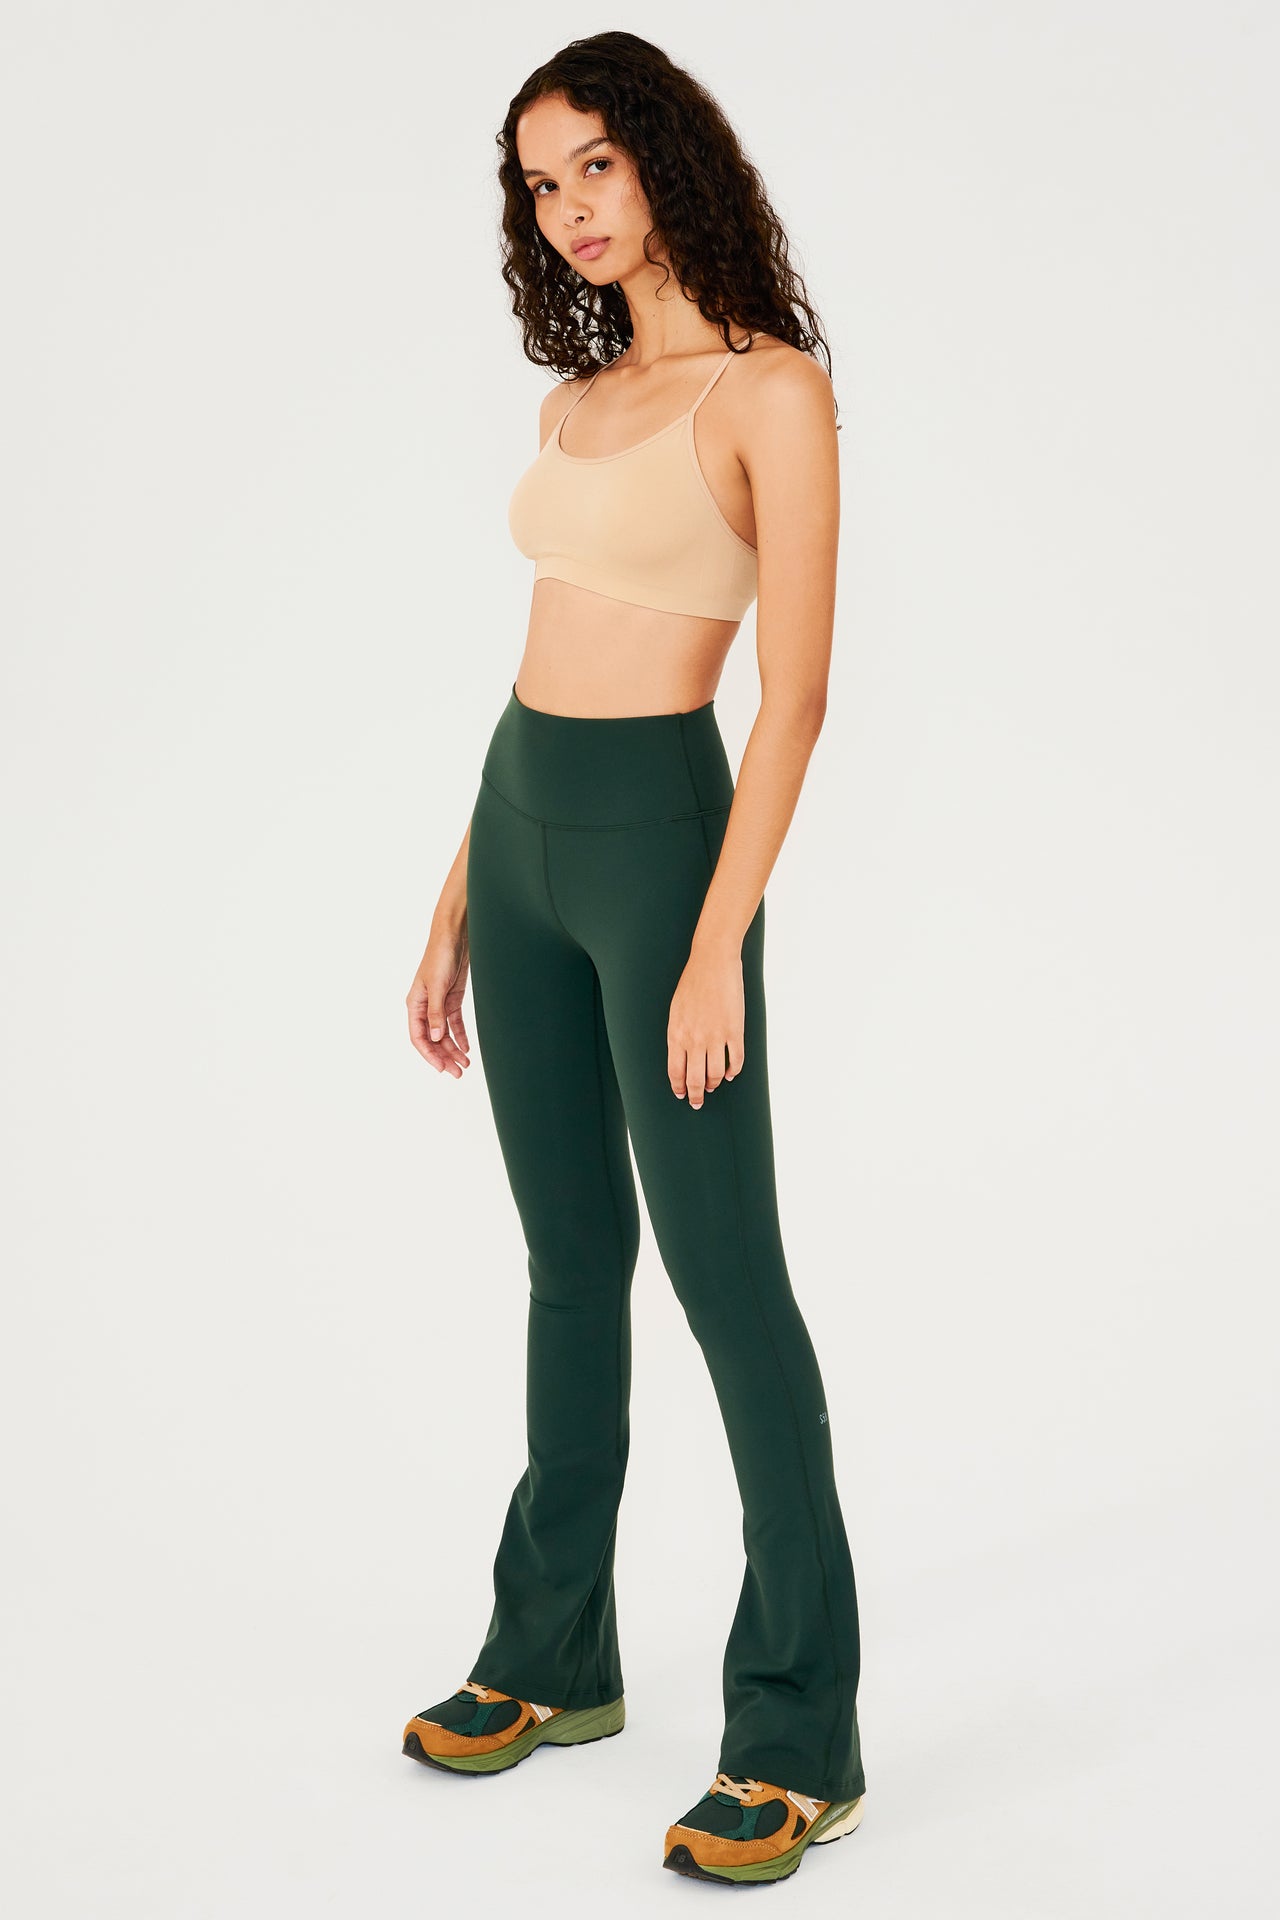 Full front side view of woman with dark wavy hair wearing dark green high waist below ankle length legging with wide flared bottoms with gray S59 logo on back of left calf and pale warm brown bra with spaghetti straps. Paired with dark green, dark orange and light green color block shoes.